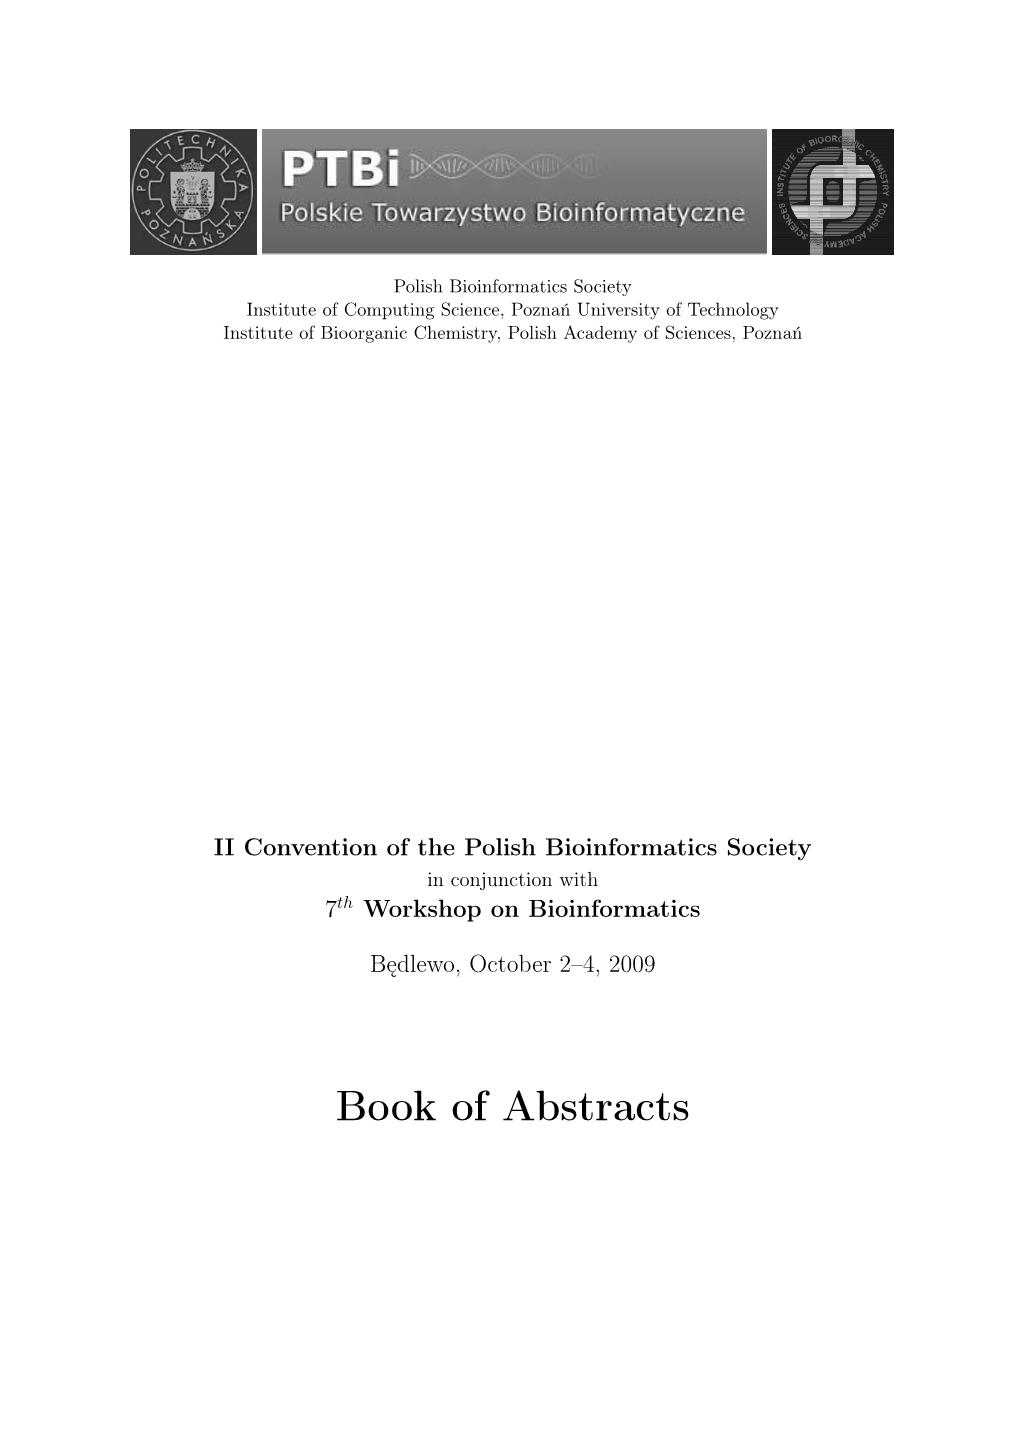 Book of Abstracts Program Committee